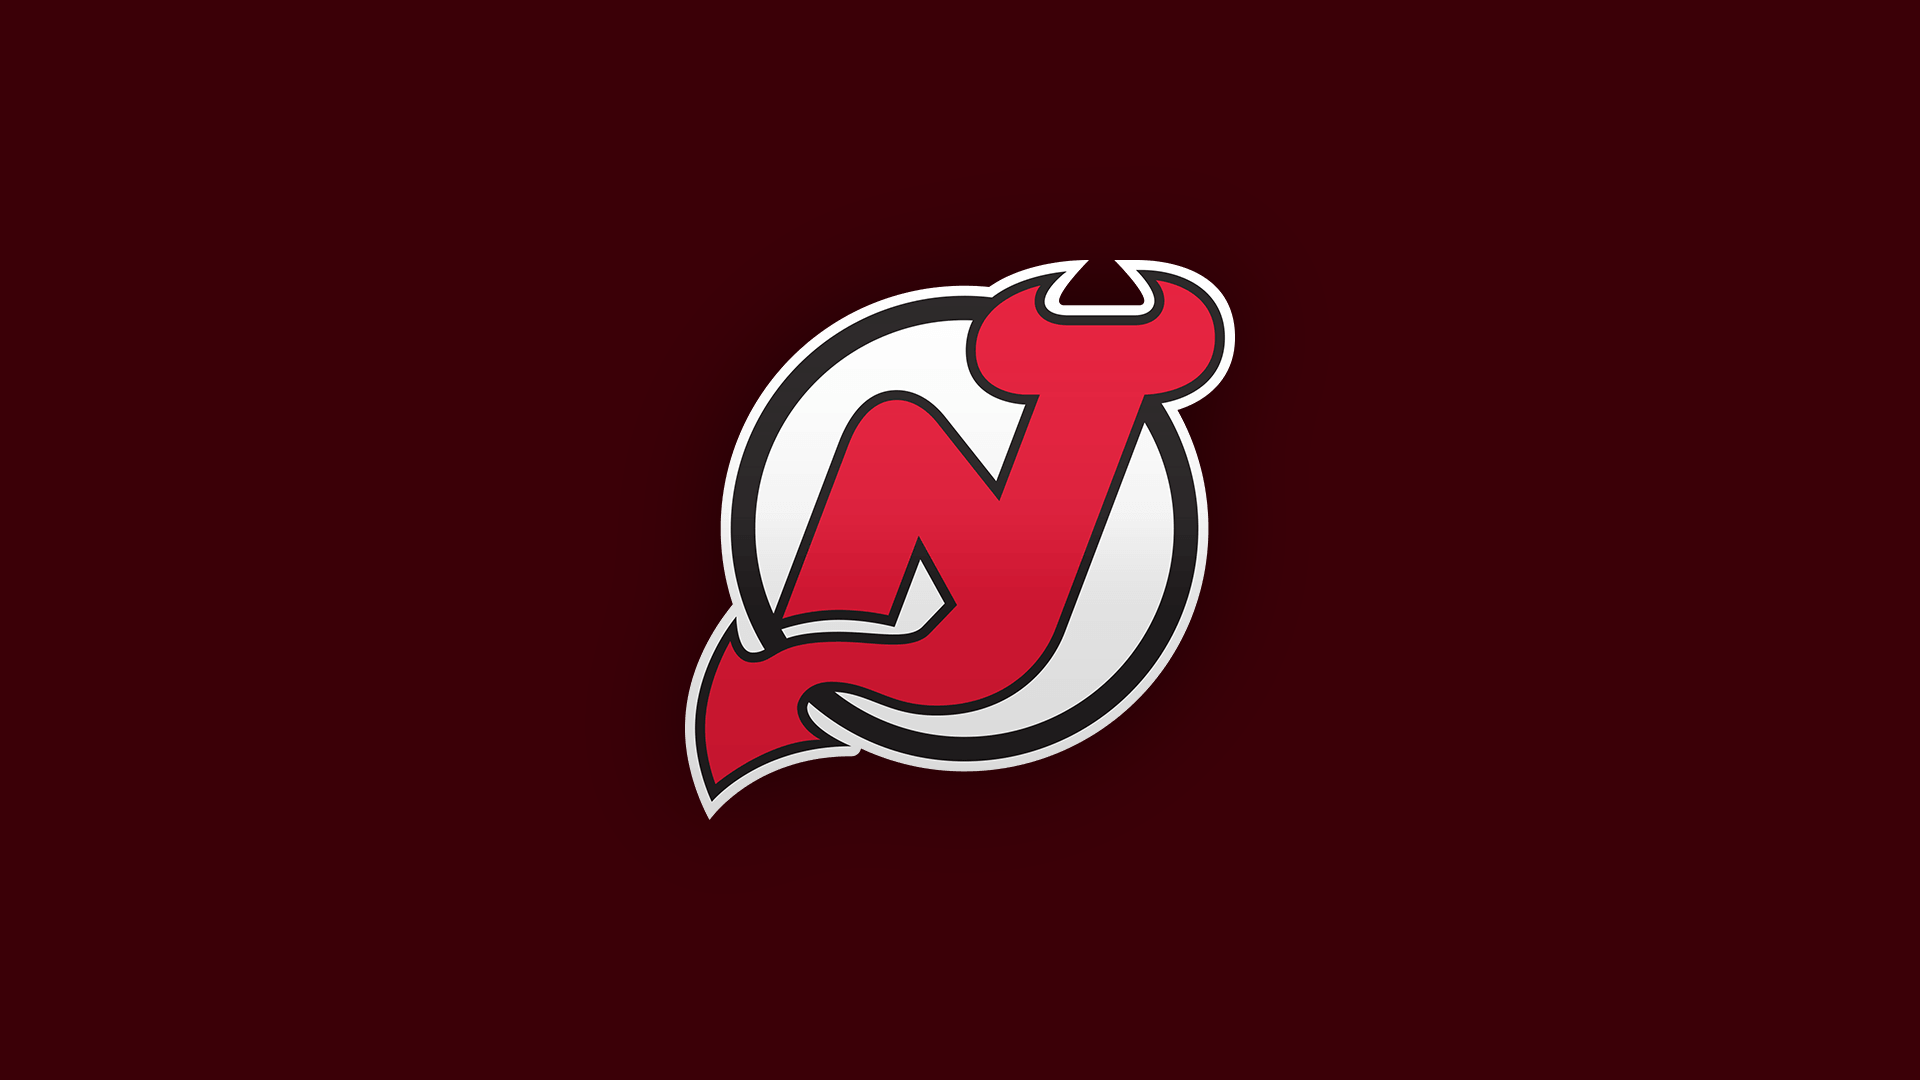 VersusSystems on X: Coming to watch New Jersey Devils VS Chicago